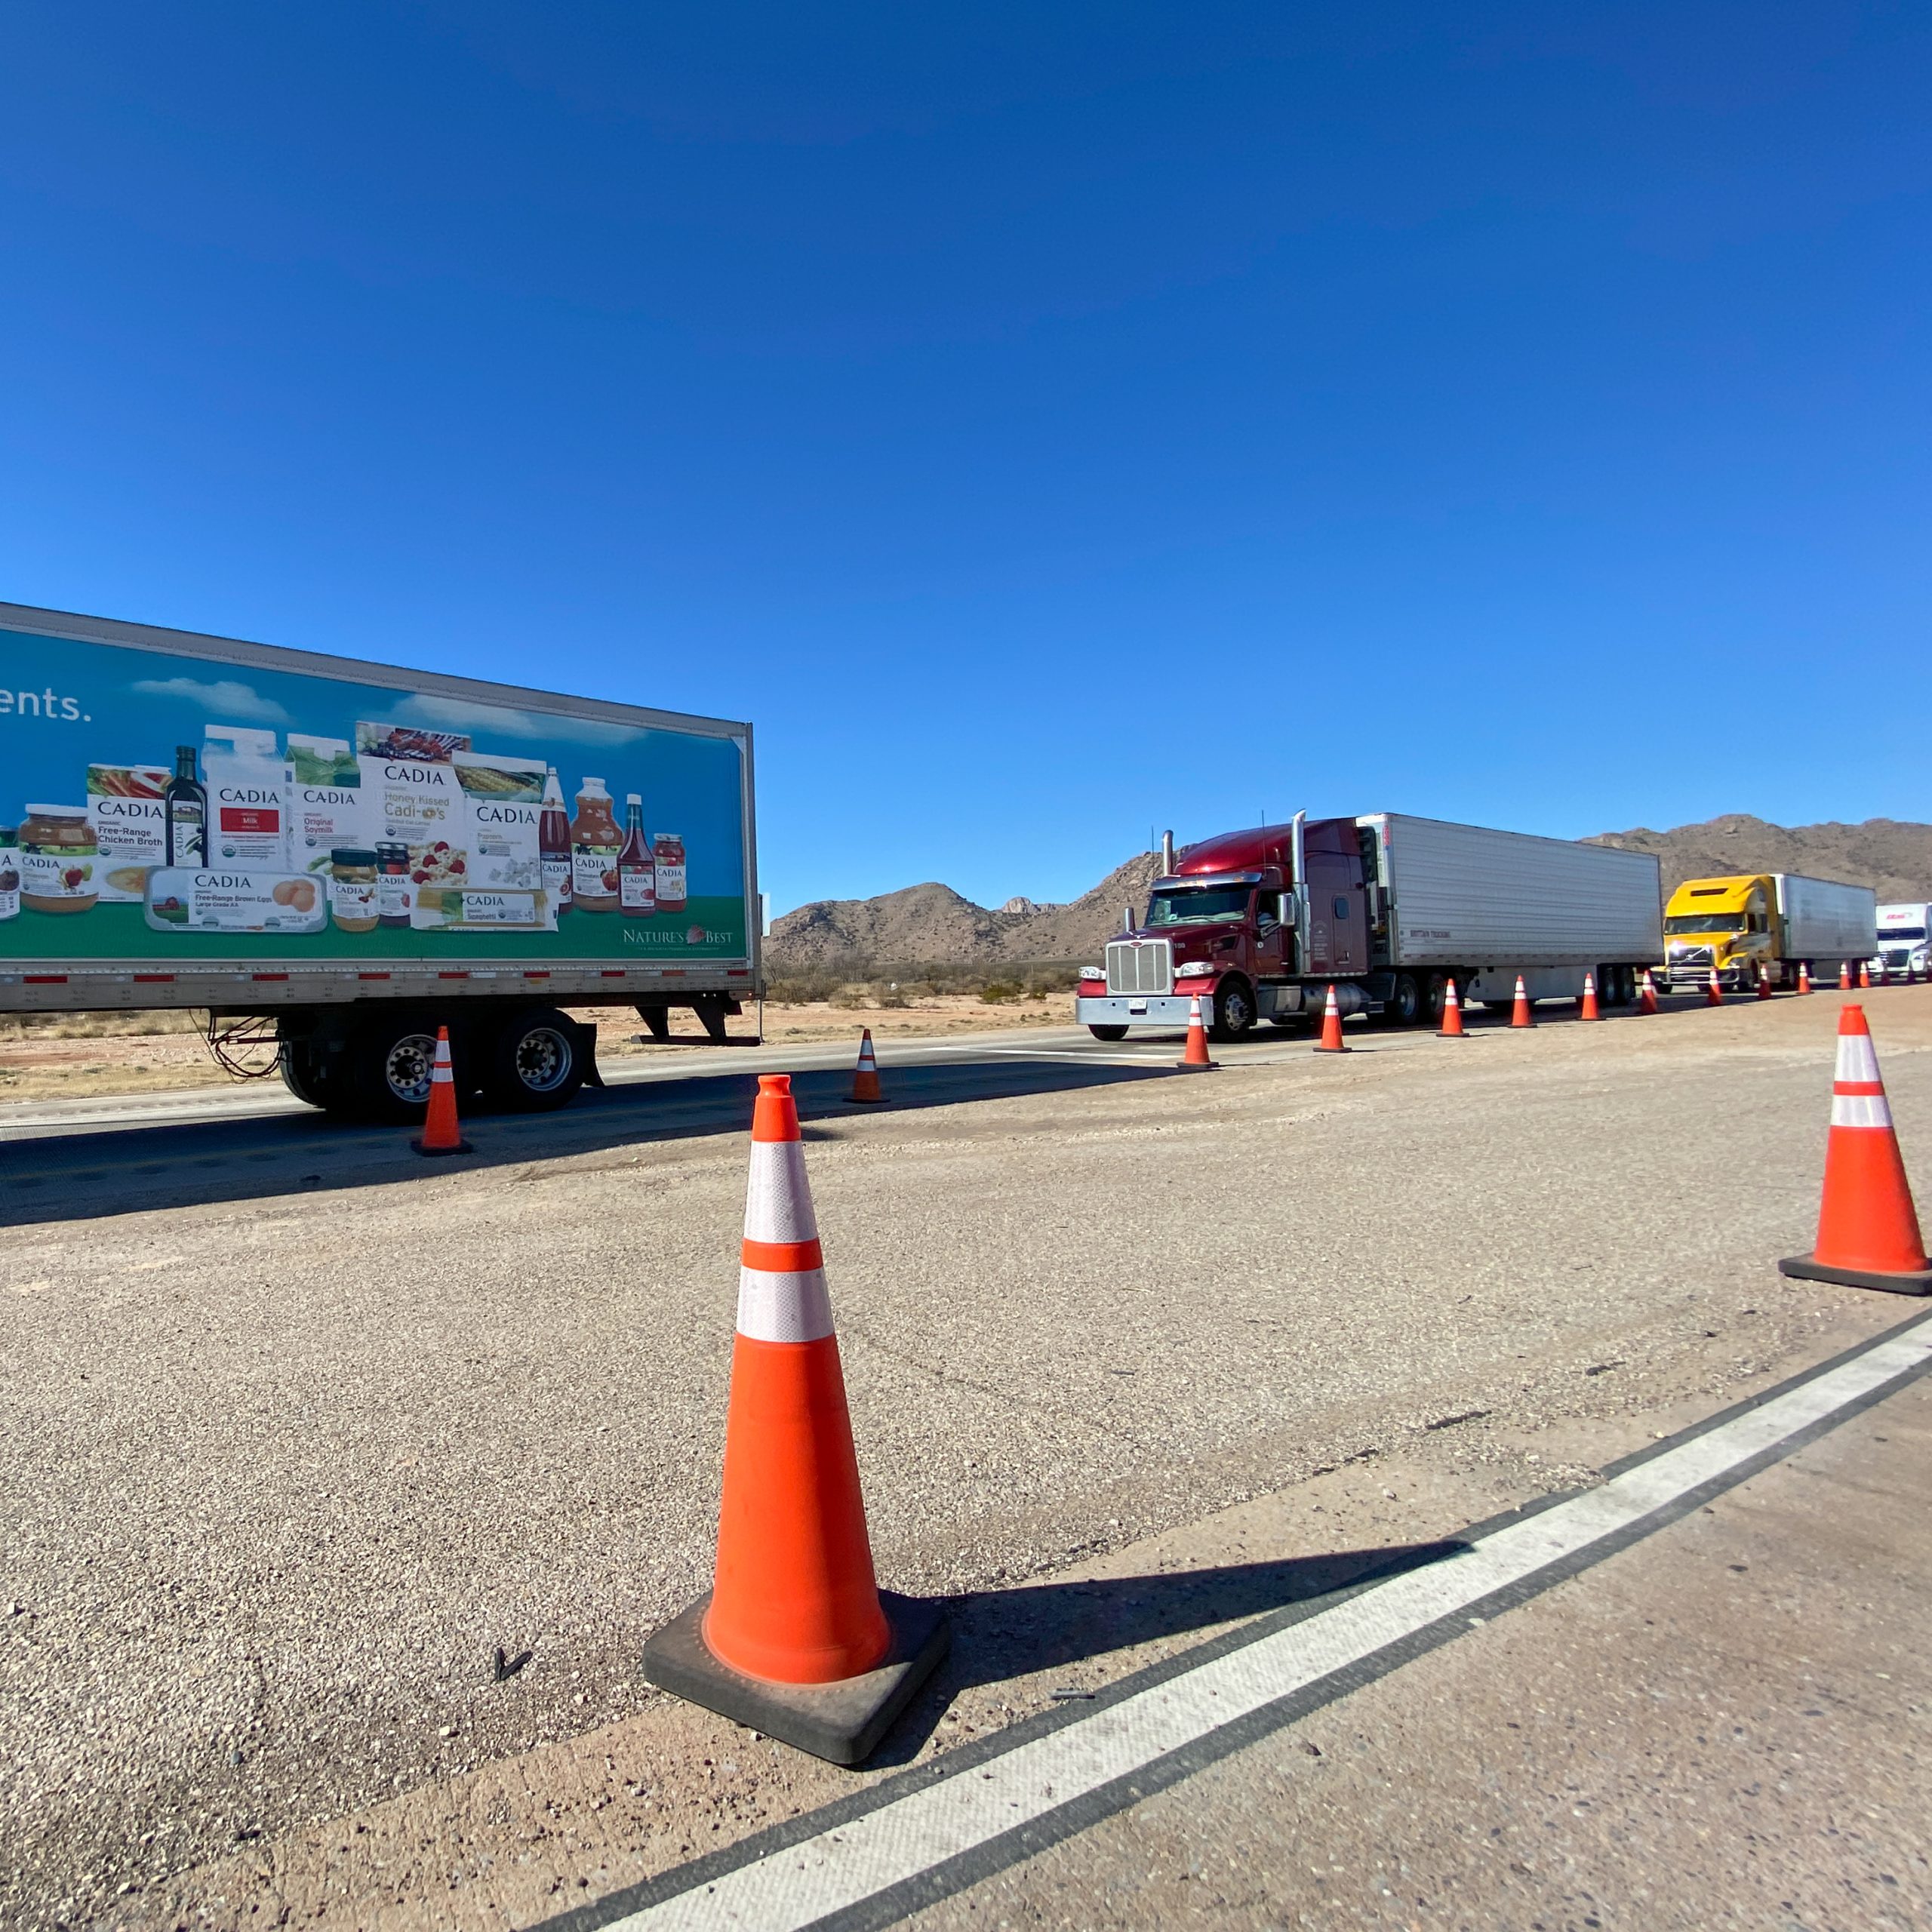 New Mexico and Texas could get new interstate